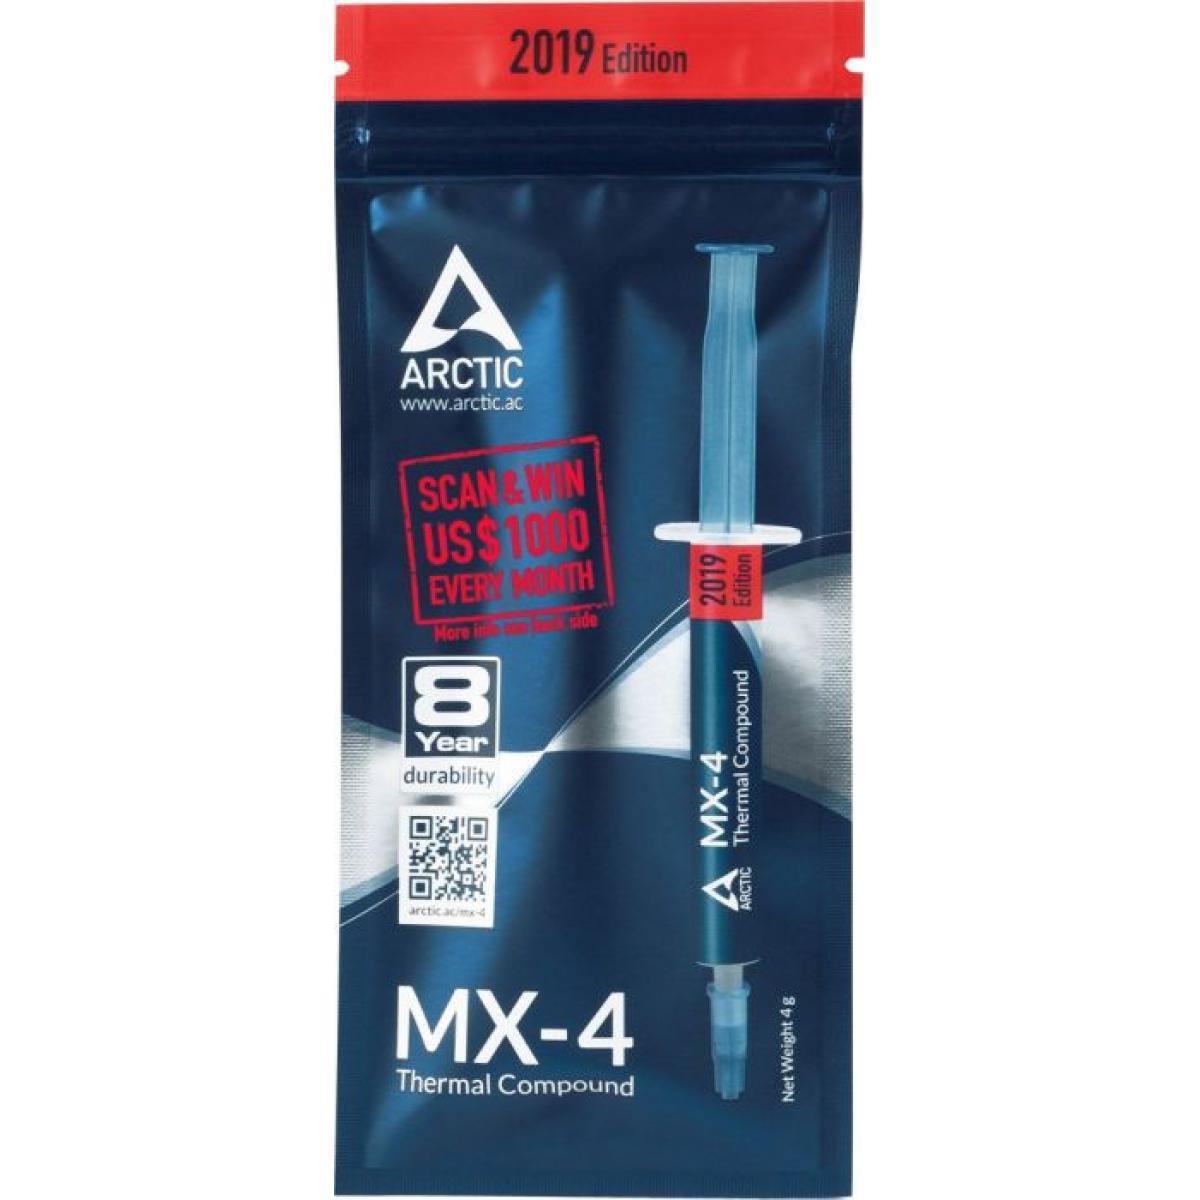 ARCTIC MX-4 4G 2019 EDITION Thermal Compound (4.0 g)